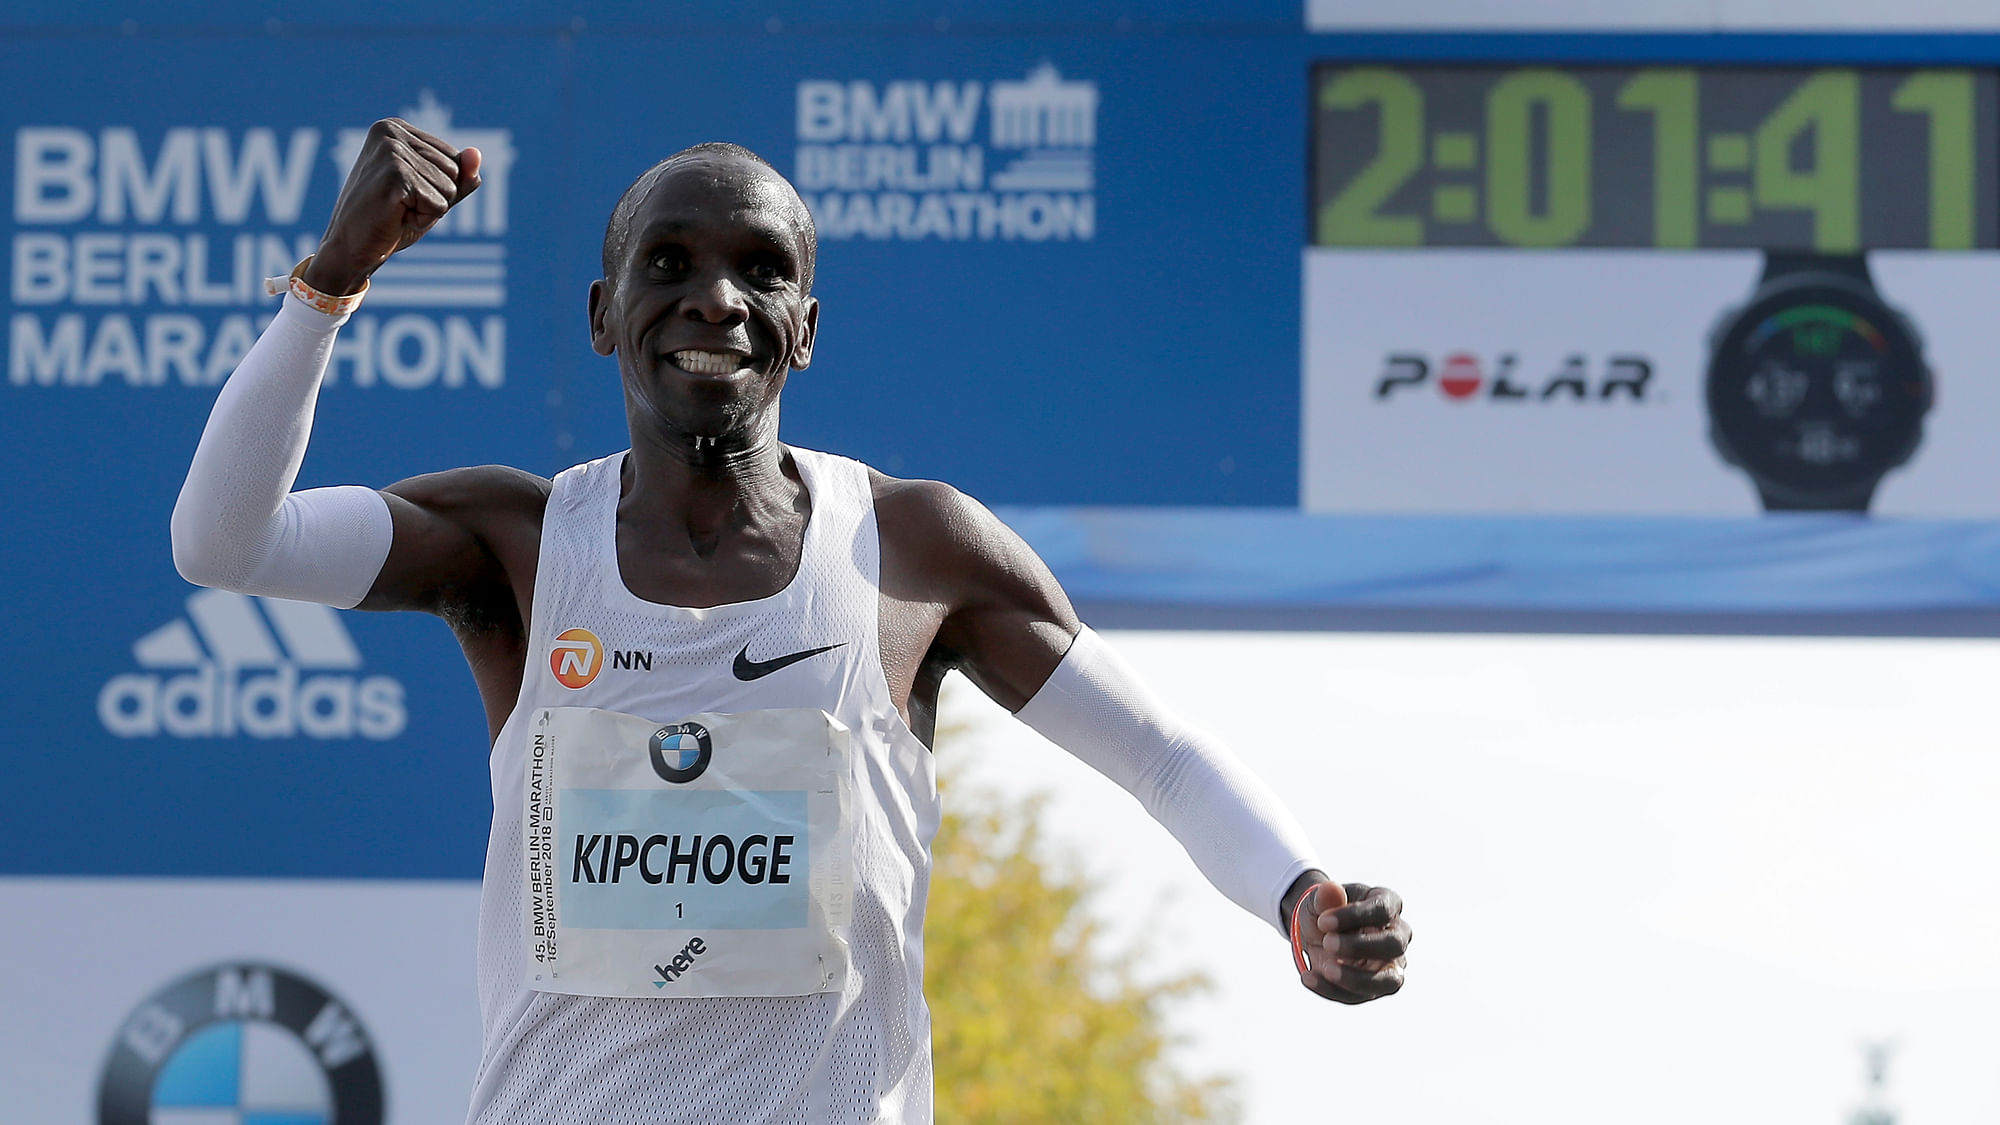 Eliud Kipchoge runs to win the 45th Berlin Marathon in Berlin, Germany, Sunday, Sept. 16, 2018. Eliud Kipchoge set a new world record in 2 hours 1 minute 39 seconds.